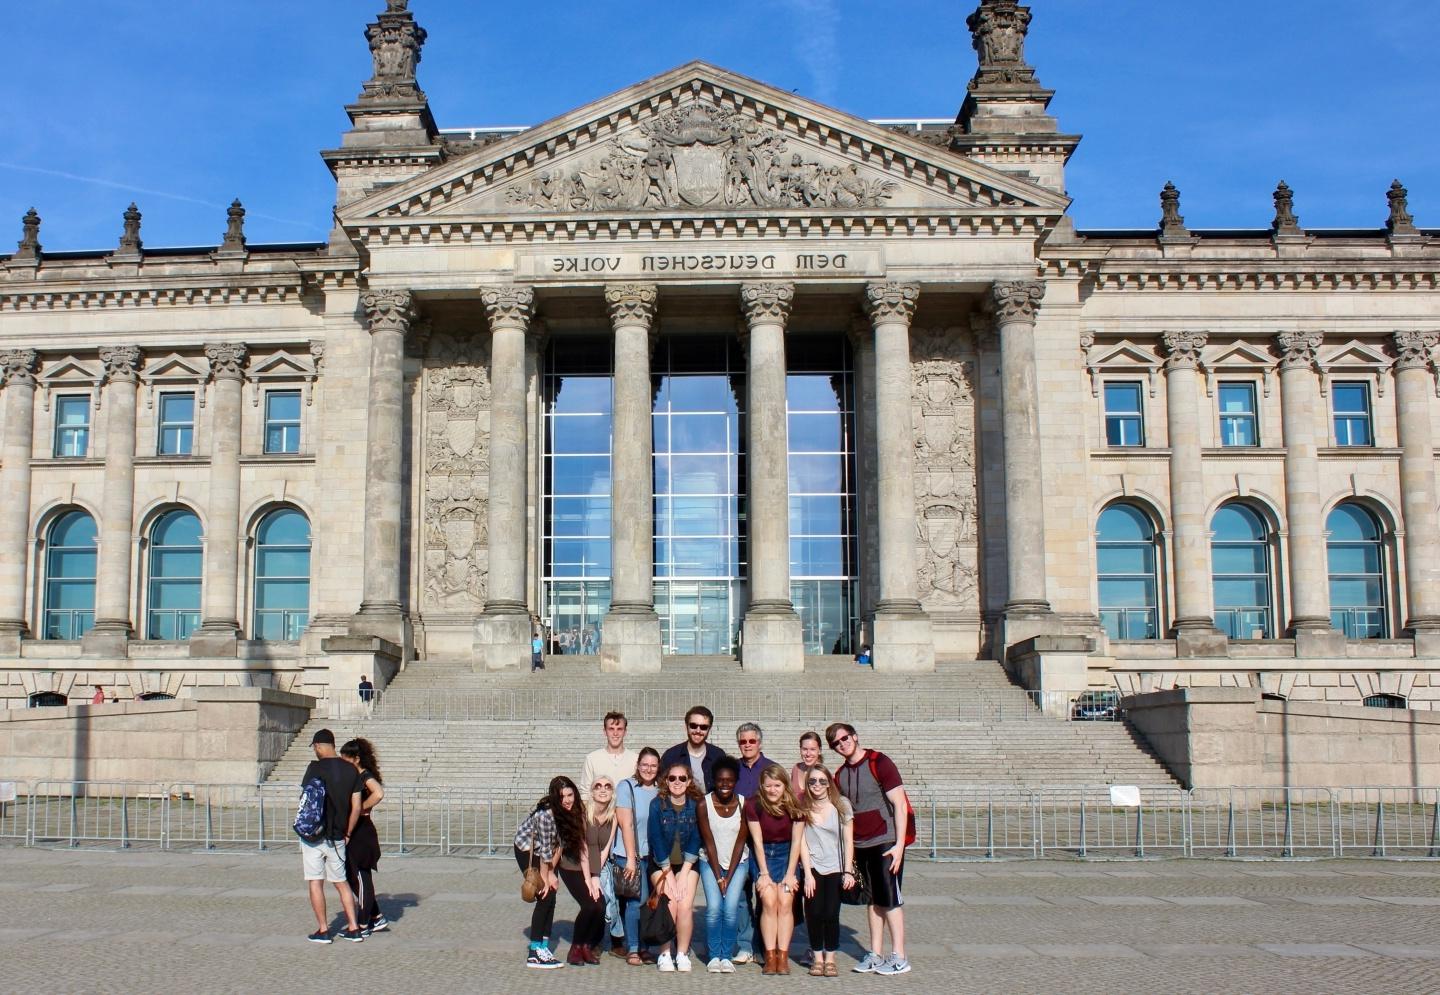 Student group posing in front of the Reichstag building in Berlin, Germany.